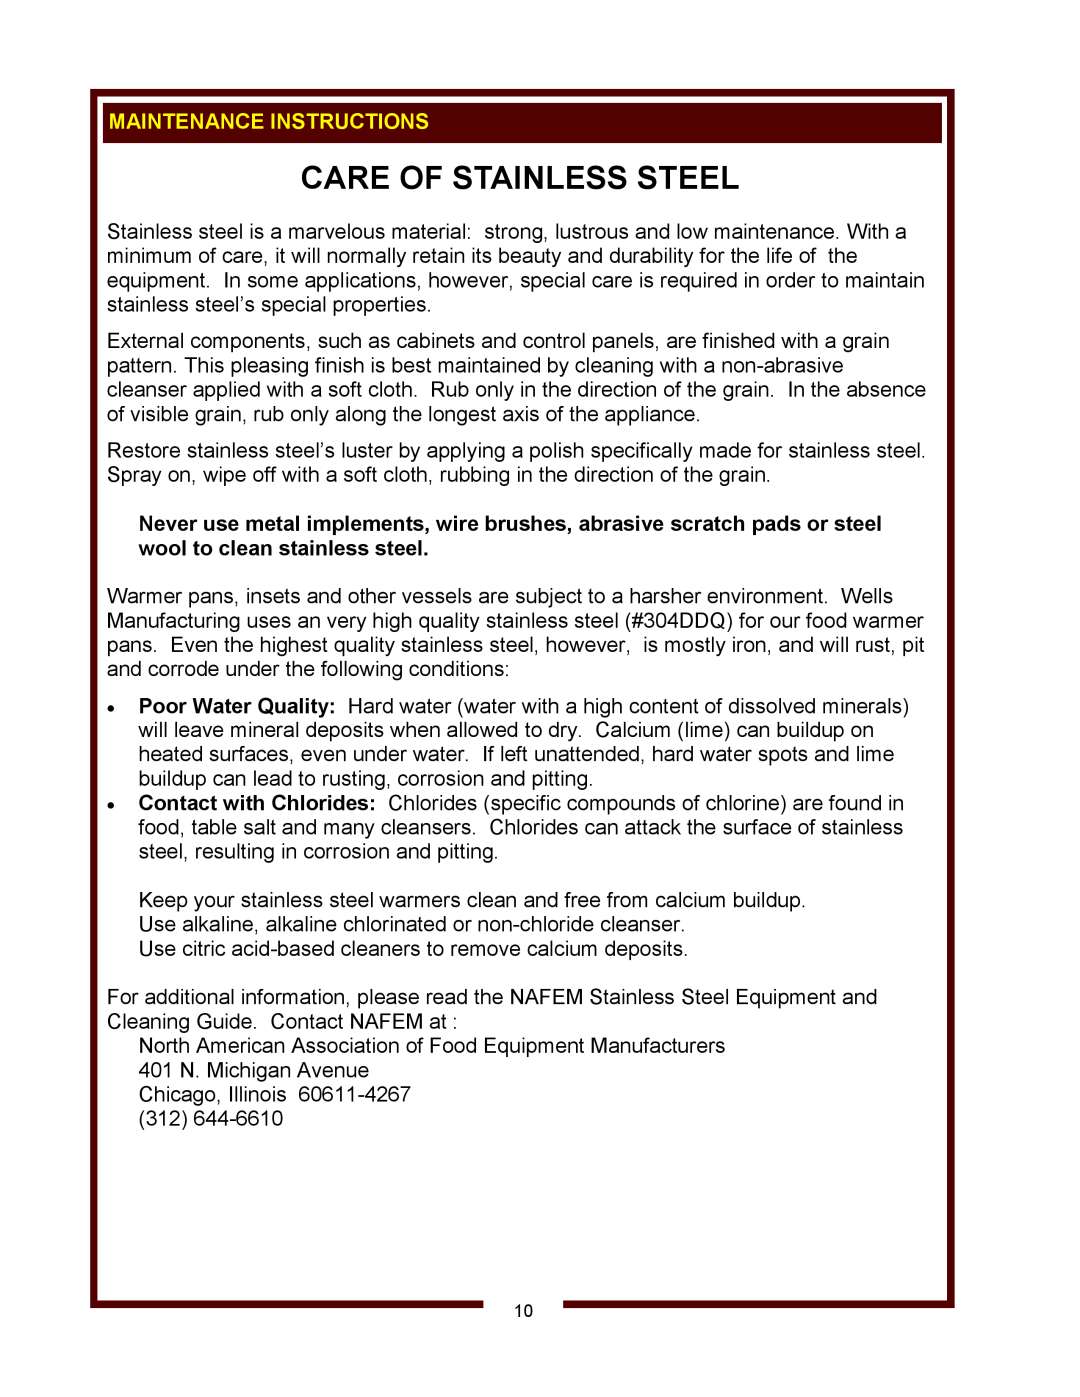 Wells HW-106D, HW/SMP-6D operation manual Care Of Stainless Steel, Maintenance Instructions 